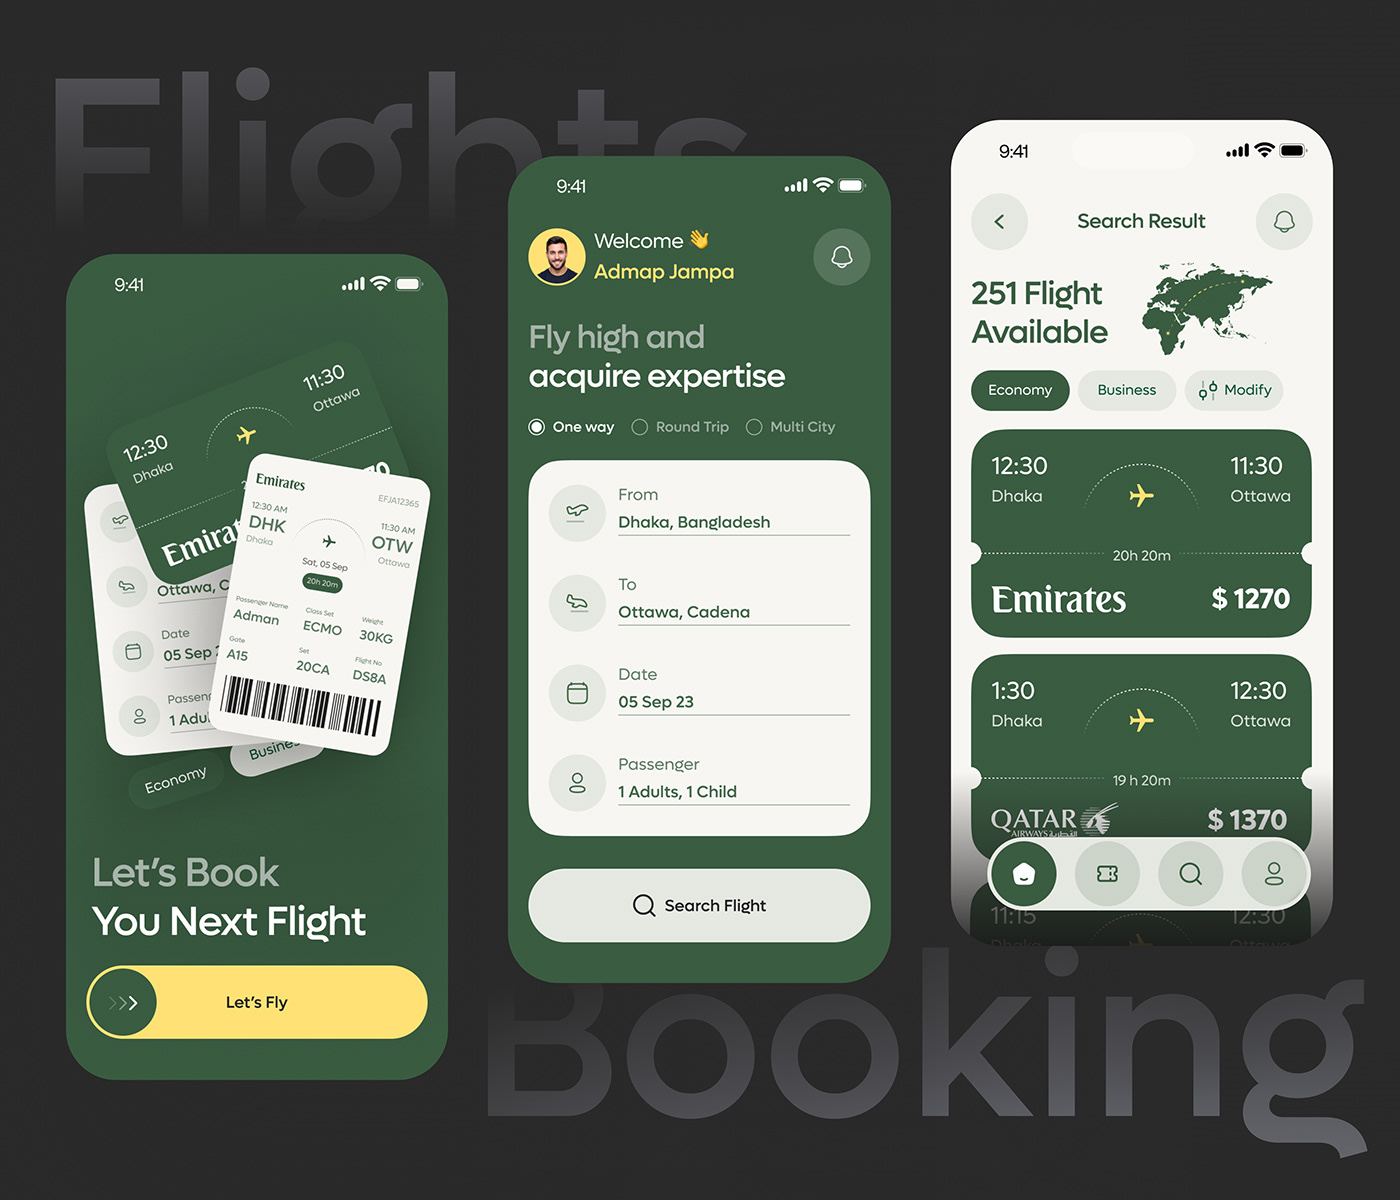 I'd like to share a recent concept I created for a flight booking app.